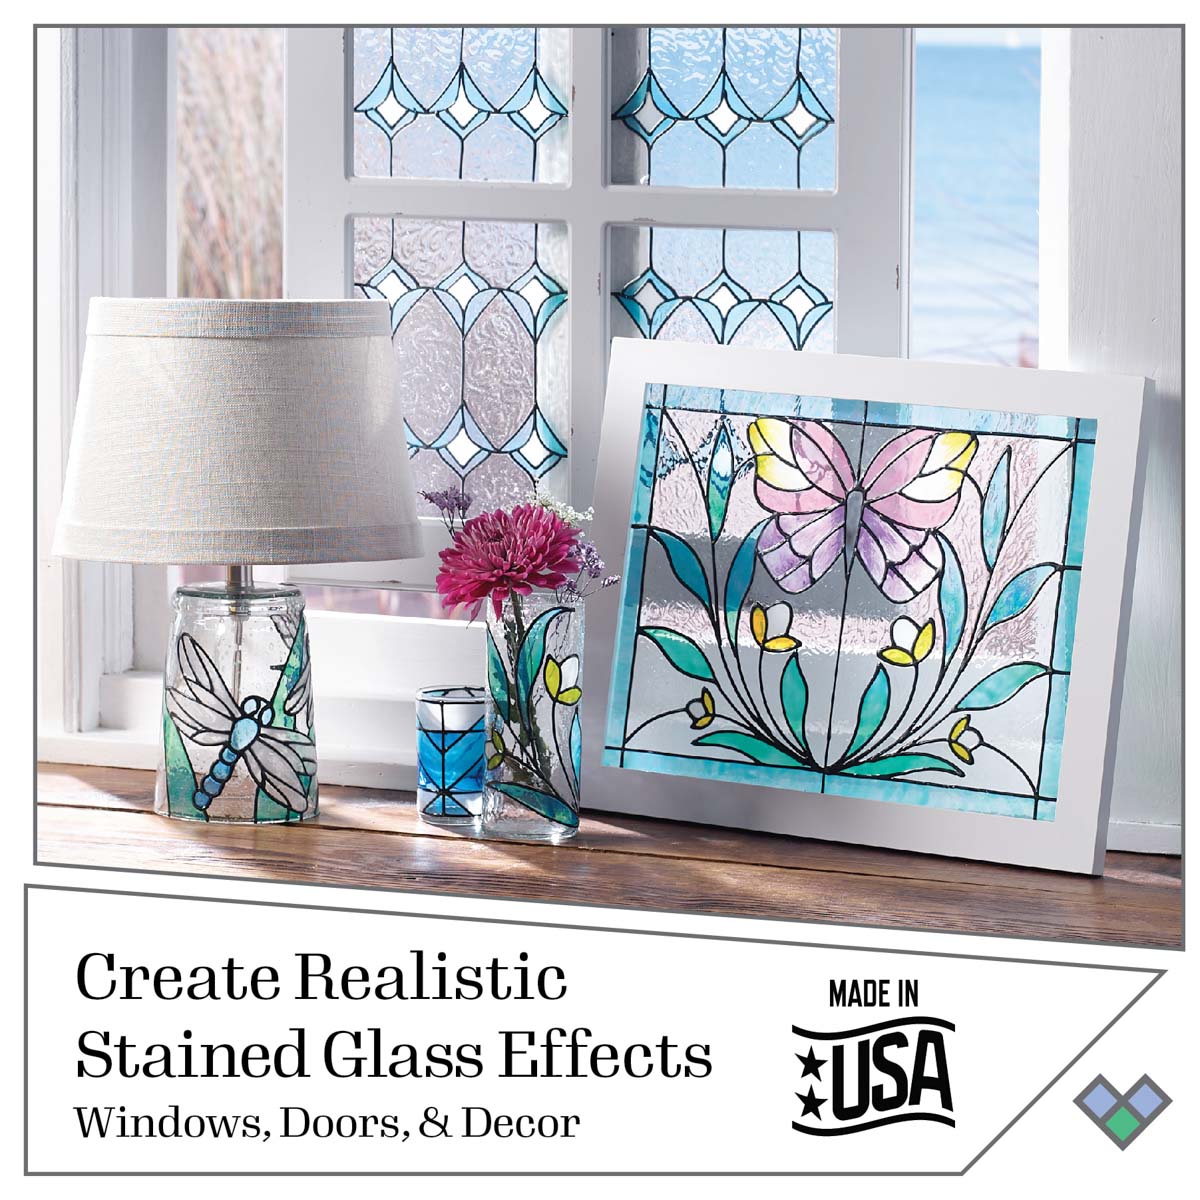 Gallery Glass ® Stained Glass Effect Paint - Kelly Green, 2 oz. - 19716